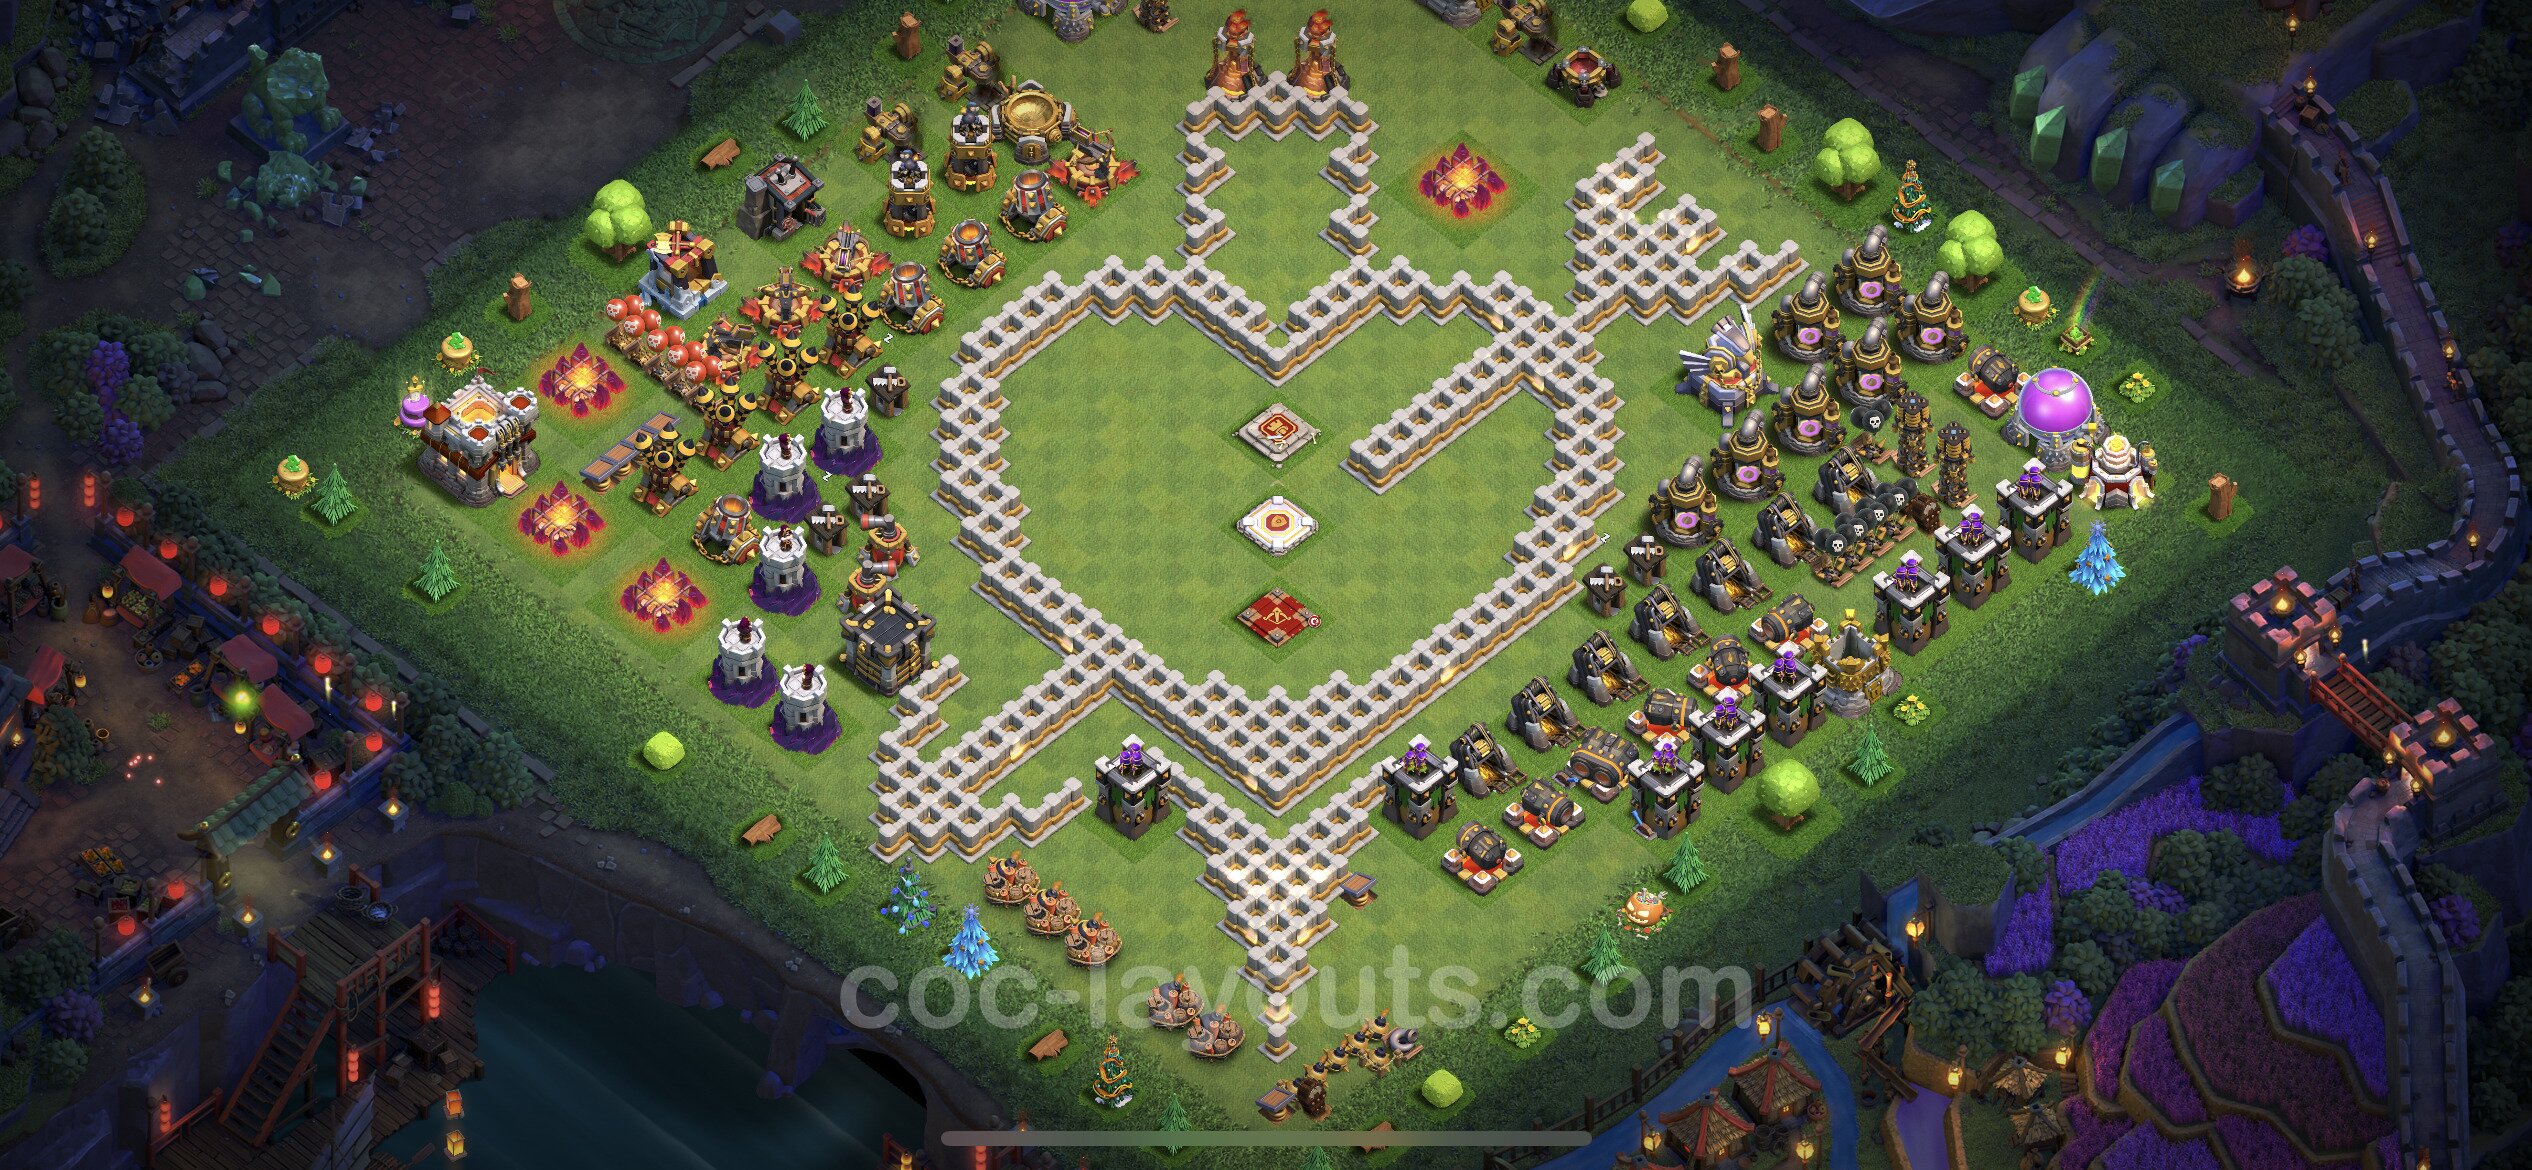 Best Funny Troll Base TH11 with Link - Town Hall Level 11 Art Base Copy -  (#3)